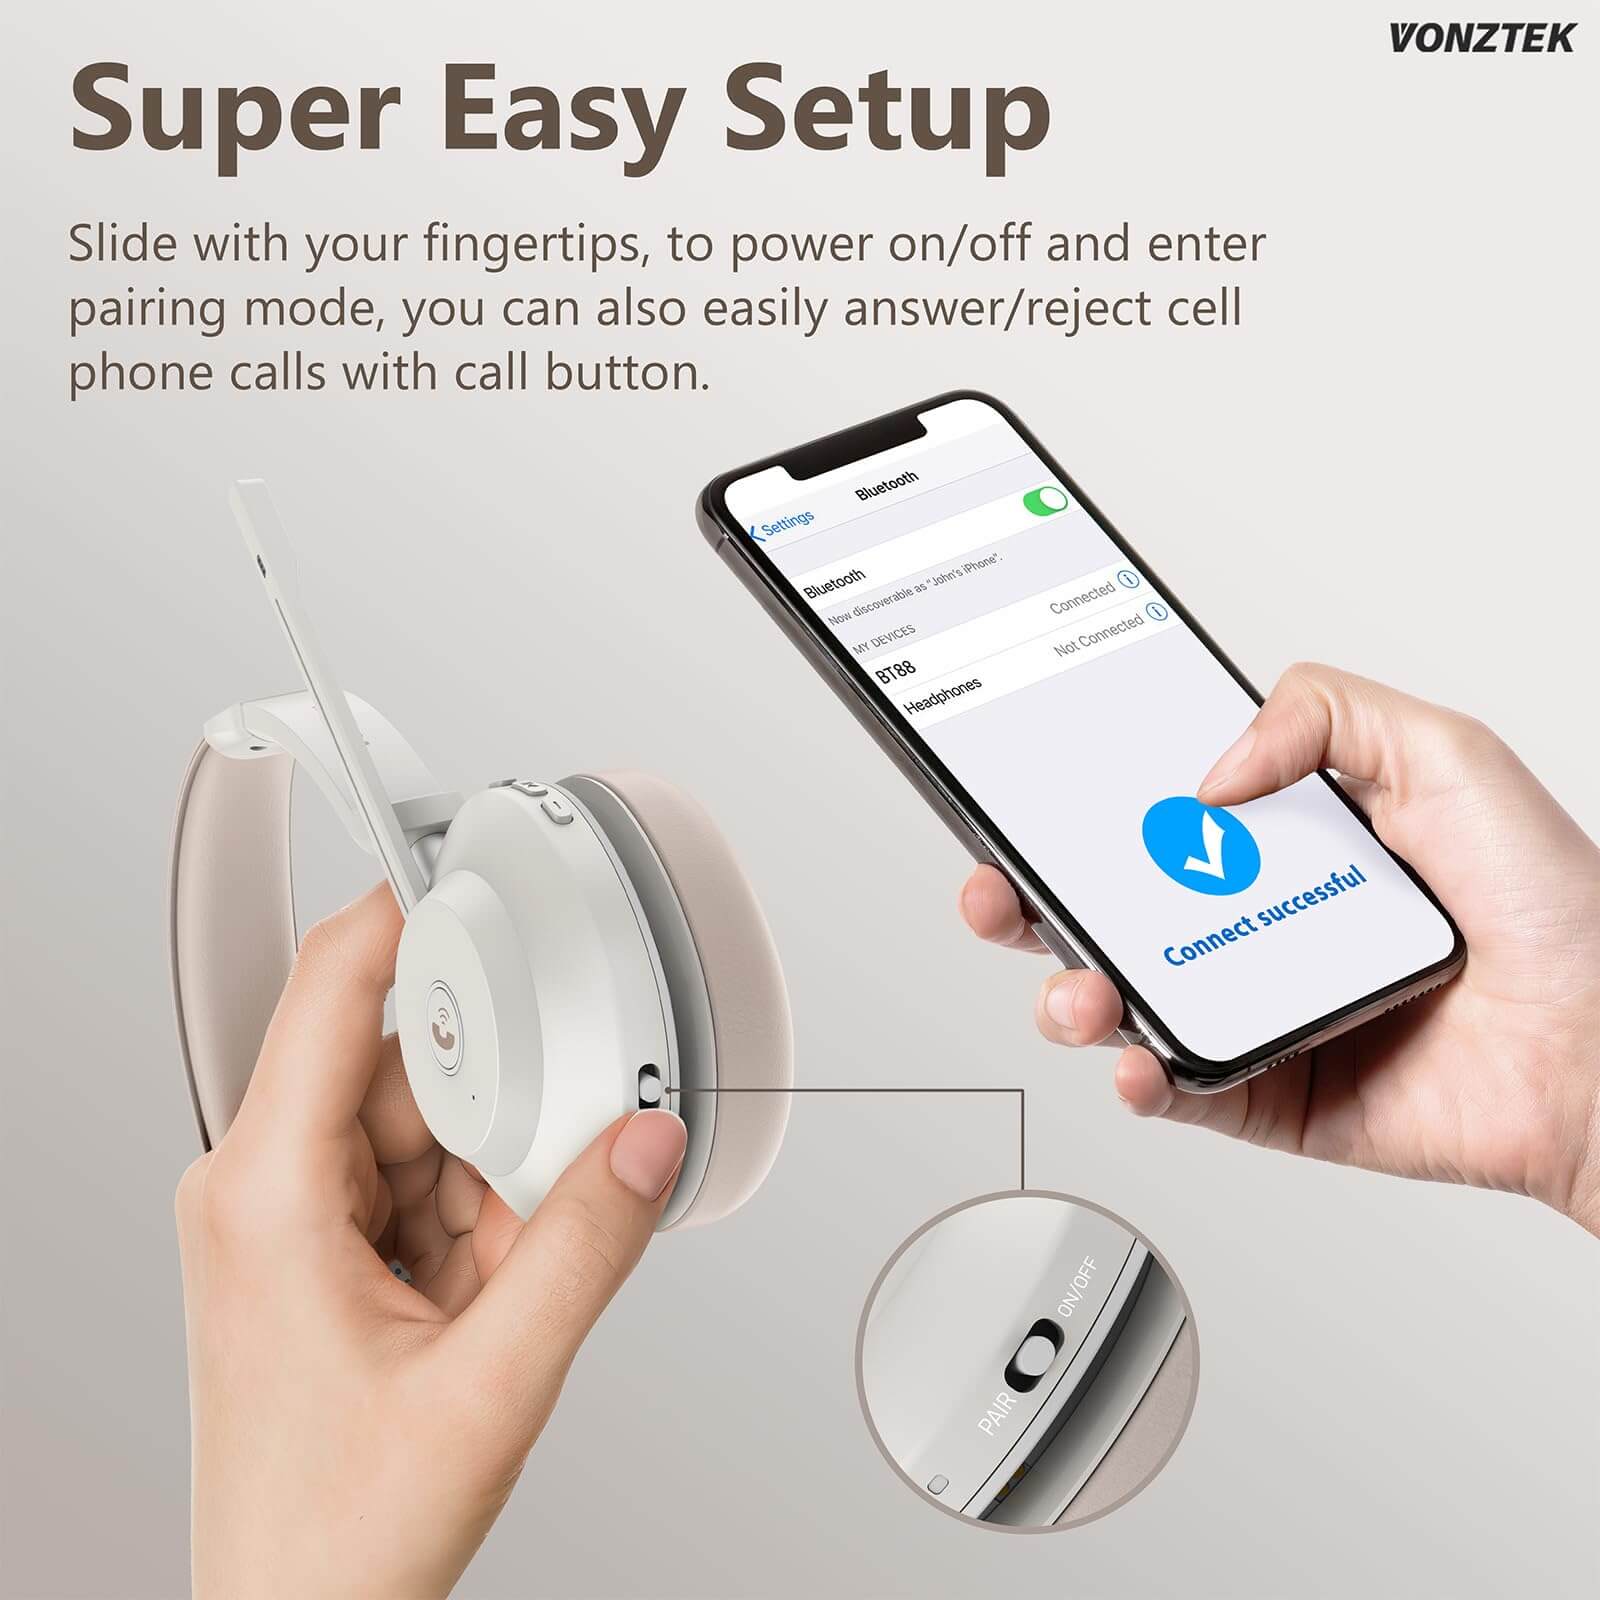 Super easy setup,Slide with your fingertips,to power on/off and enter pairing mode,you can also easily answer/reject cell phone calls with call button.